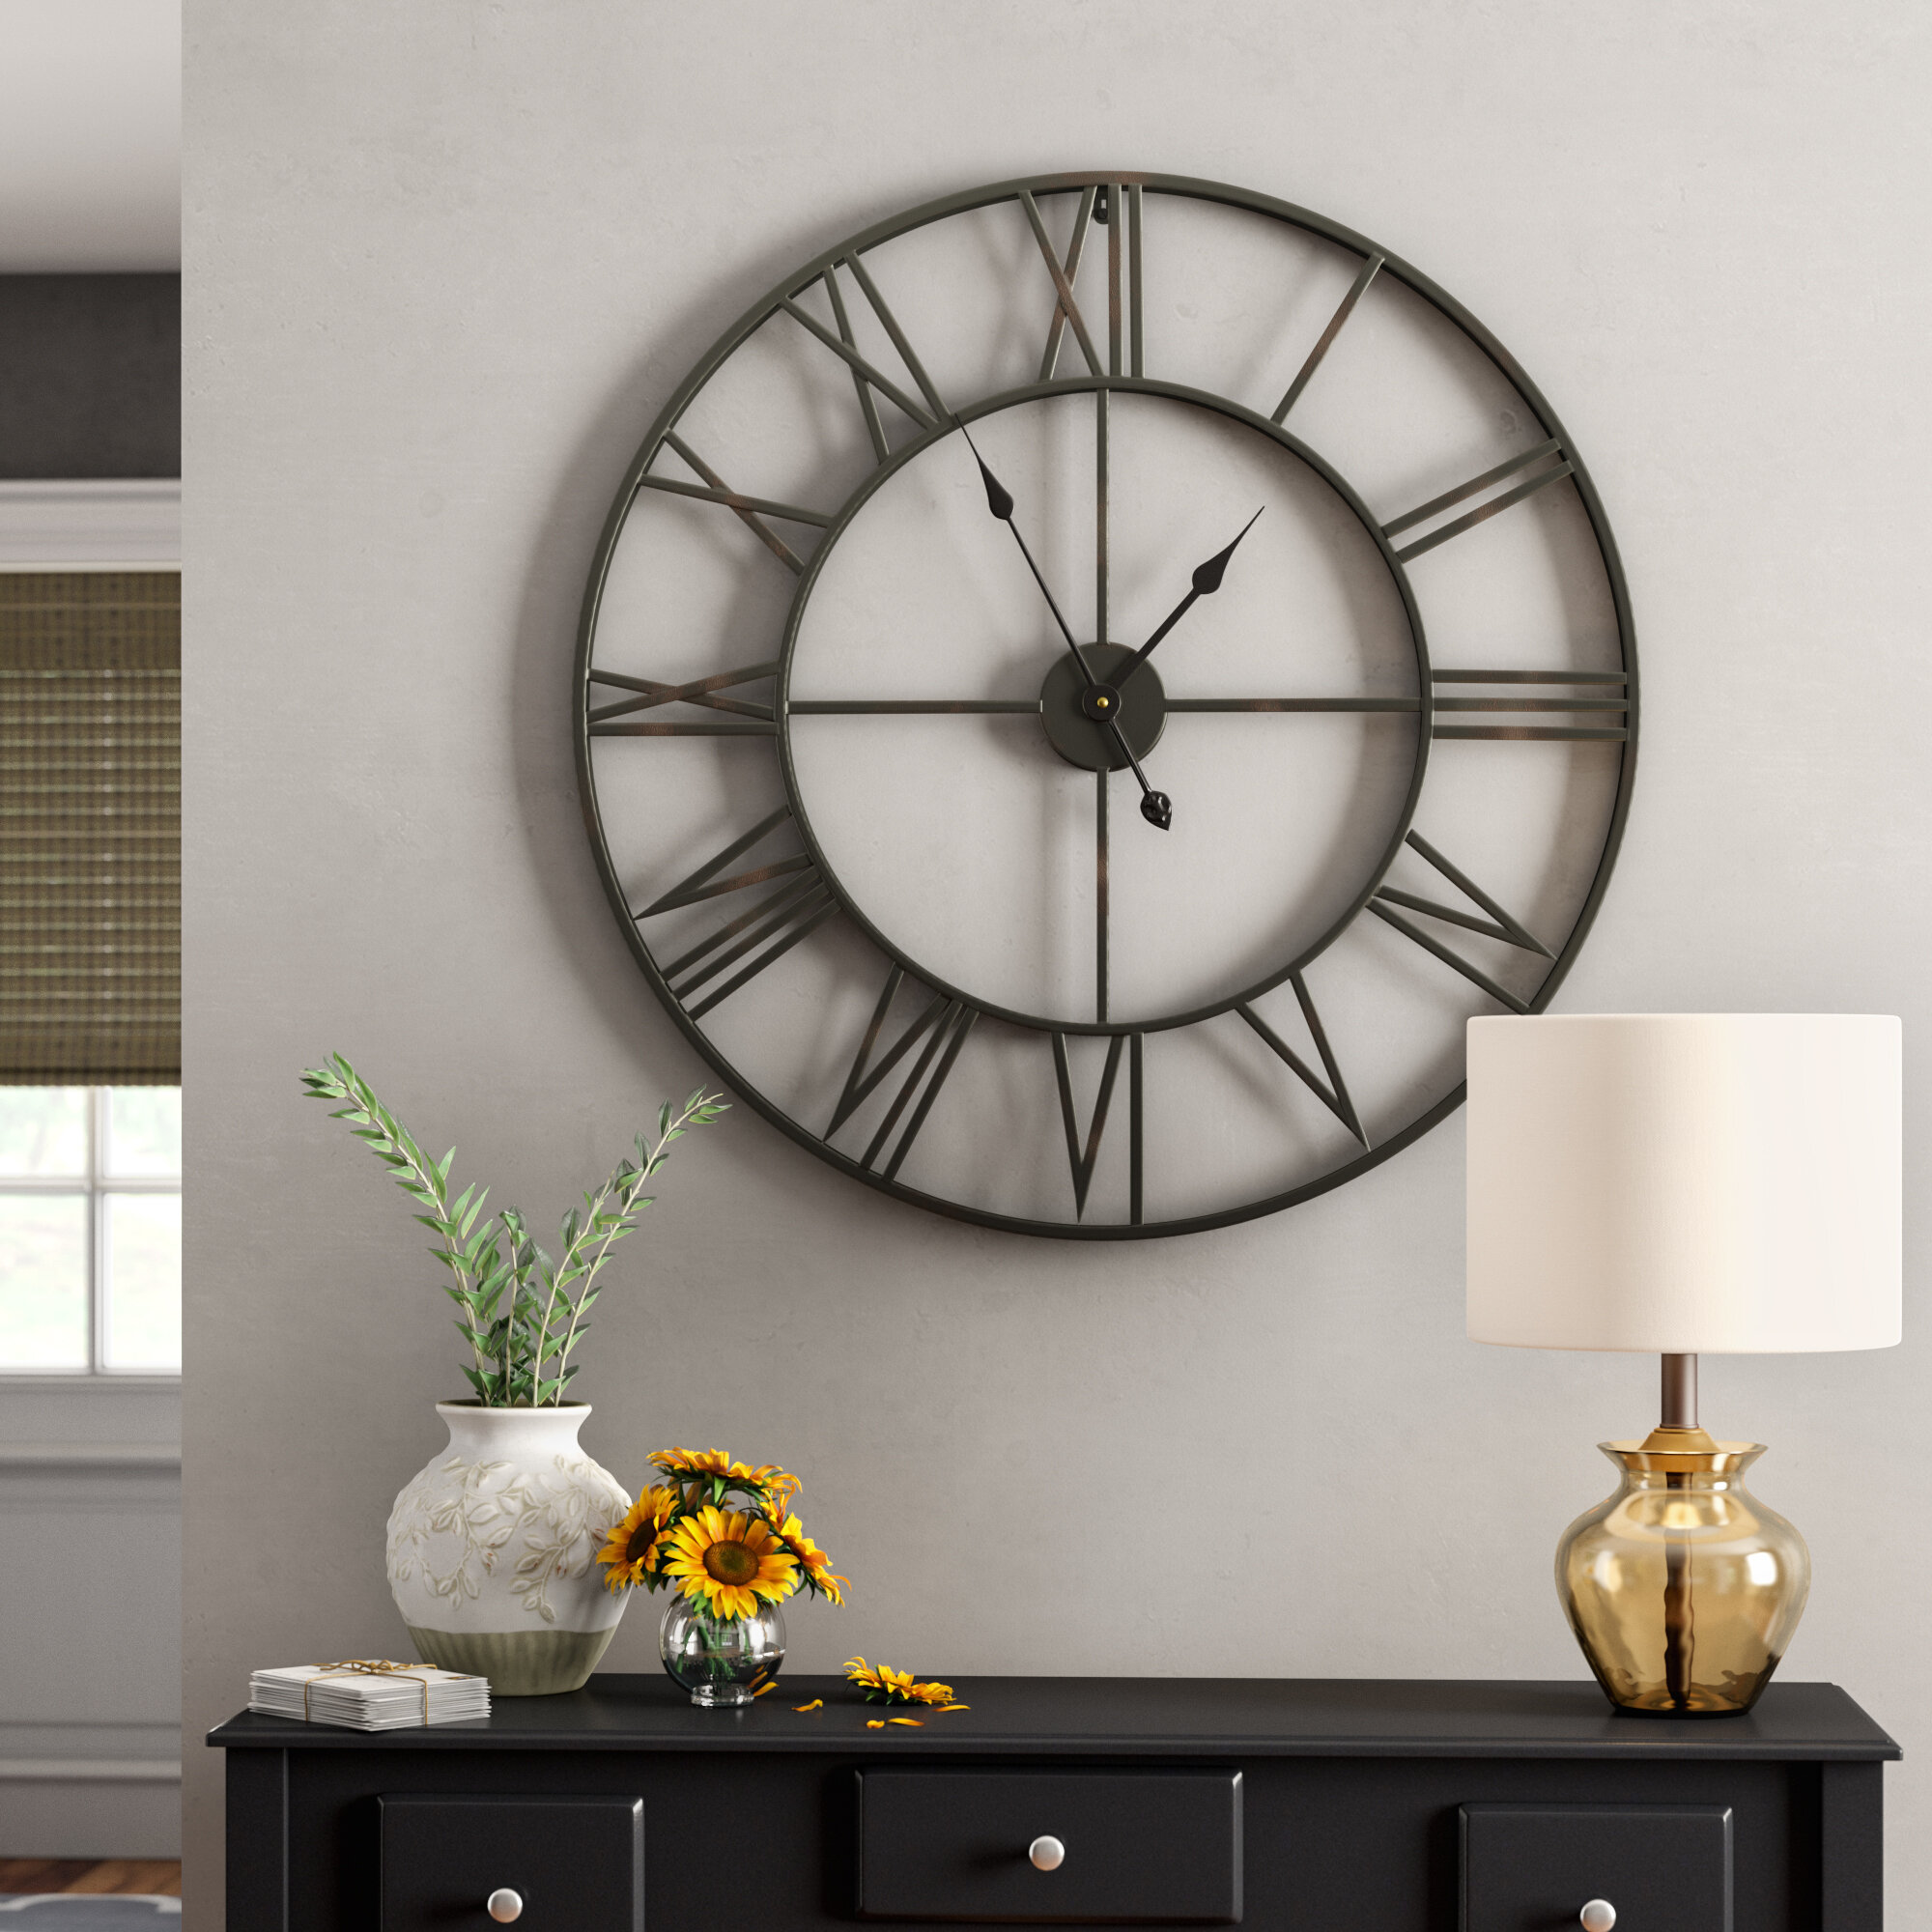 HENSE 14-Inch Large Wood Wall Clock Retro Vintage Style Decorative Battery 